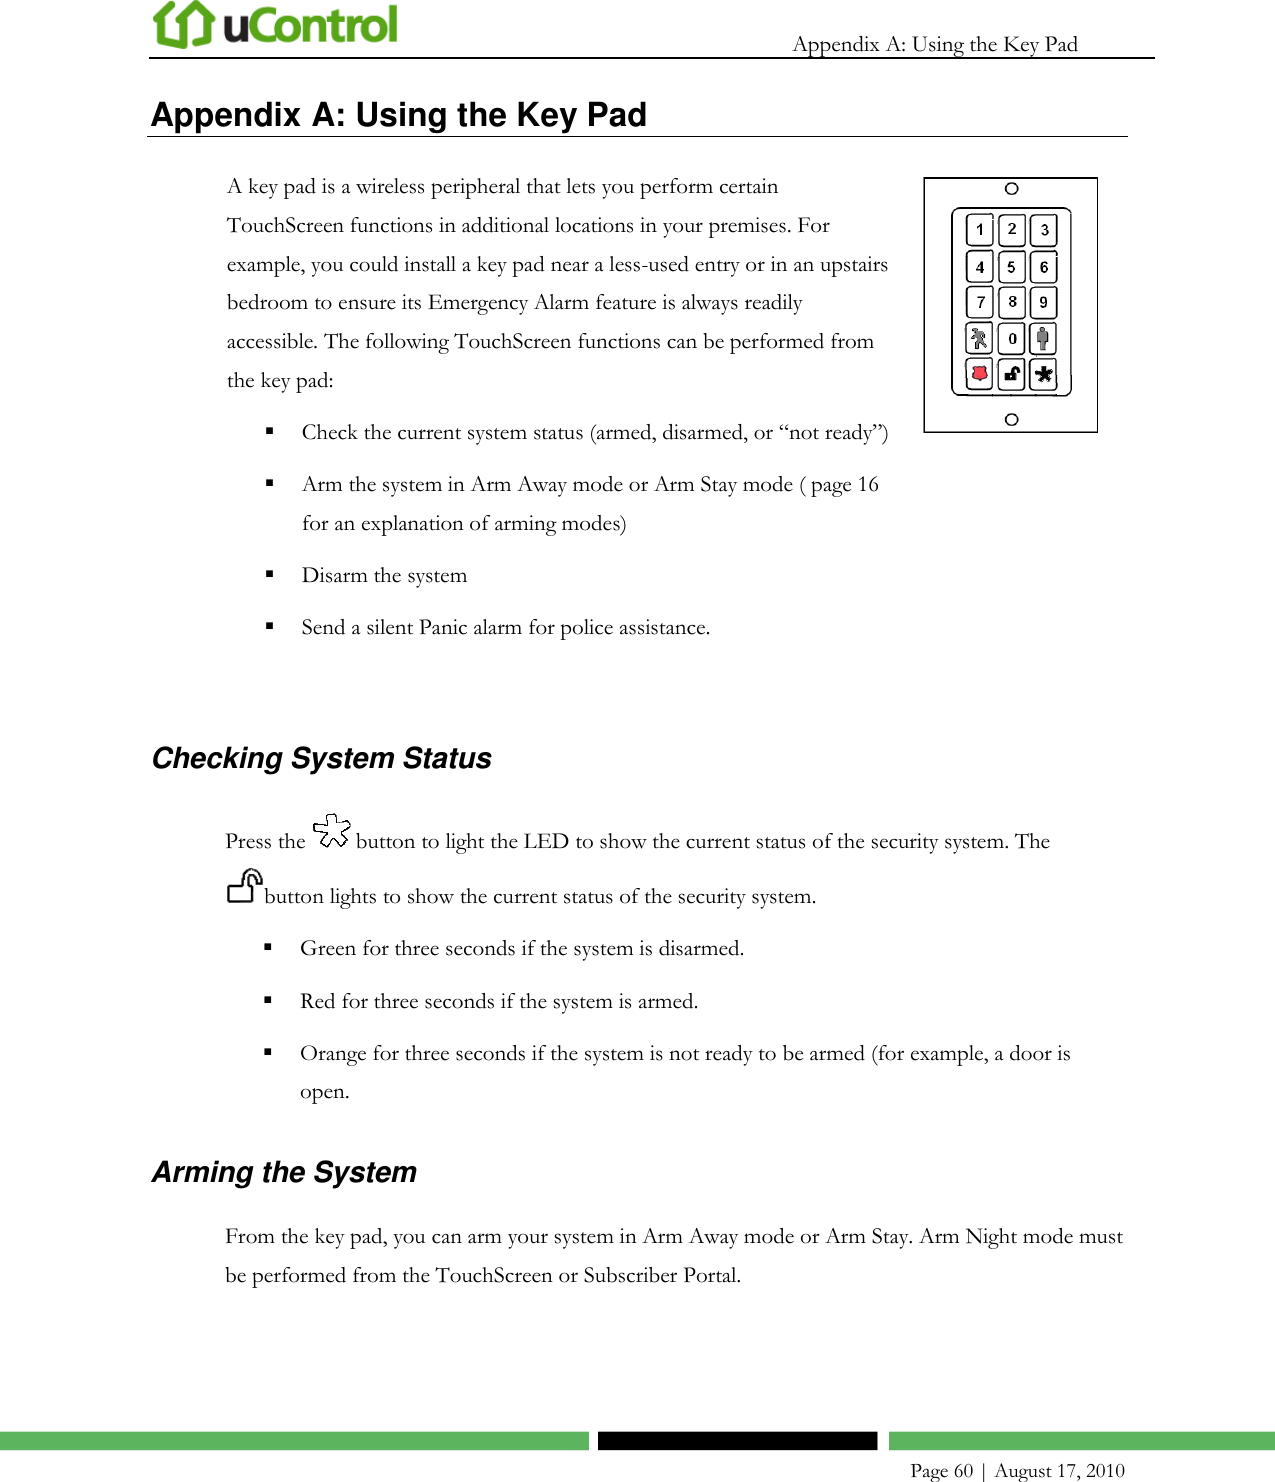   Appendix A: Using the Key Pad    Page 60 | August 17, 2010 Appendix A: Using the Key Pad A key pad is a wireless peripheral that lets you perform certain TouchScreen functions in additional locations in your premises. For example, you could install a key pad near a less-used entry or in an upstairs bedroom to ensure its Emergency Alarm feature is always readily accessible. The following TouchScreen functions can be performed from the key pad:  Check the current system status (armed, disarmed, or ―not ready‖)  Arm the system in Arm Away mode or Arm Stay mode ( page 16 for an explanation of arming modes)  Disarm the system  Send a silent Panic alarm for police assistance.    Checking System Status Press the   button to light the LED to show the current status of the security system. The button lights to show the current status of the security system.  Green for three seconds if the system is disarmed.  Red for three seconds if the system is armed.  Orange for three seconds if the system is not ready to be armed (for example, a door is open. Arming the System From the key pad, you can arm your system in Arm Away mode or Arm Stay. Arm Night mode must be performed from the TouchScreen or Subscriber Portal. 